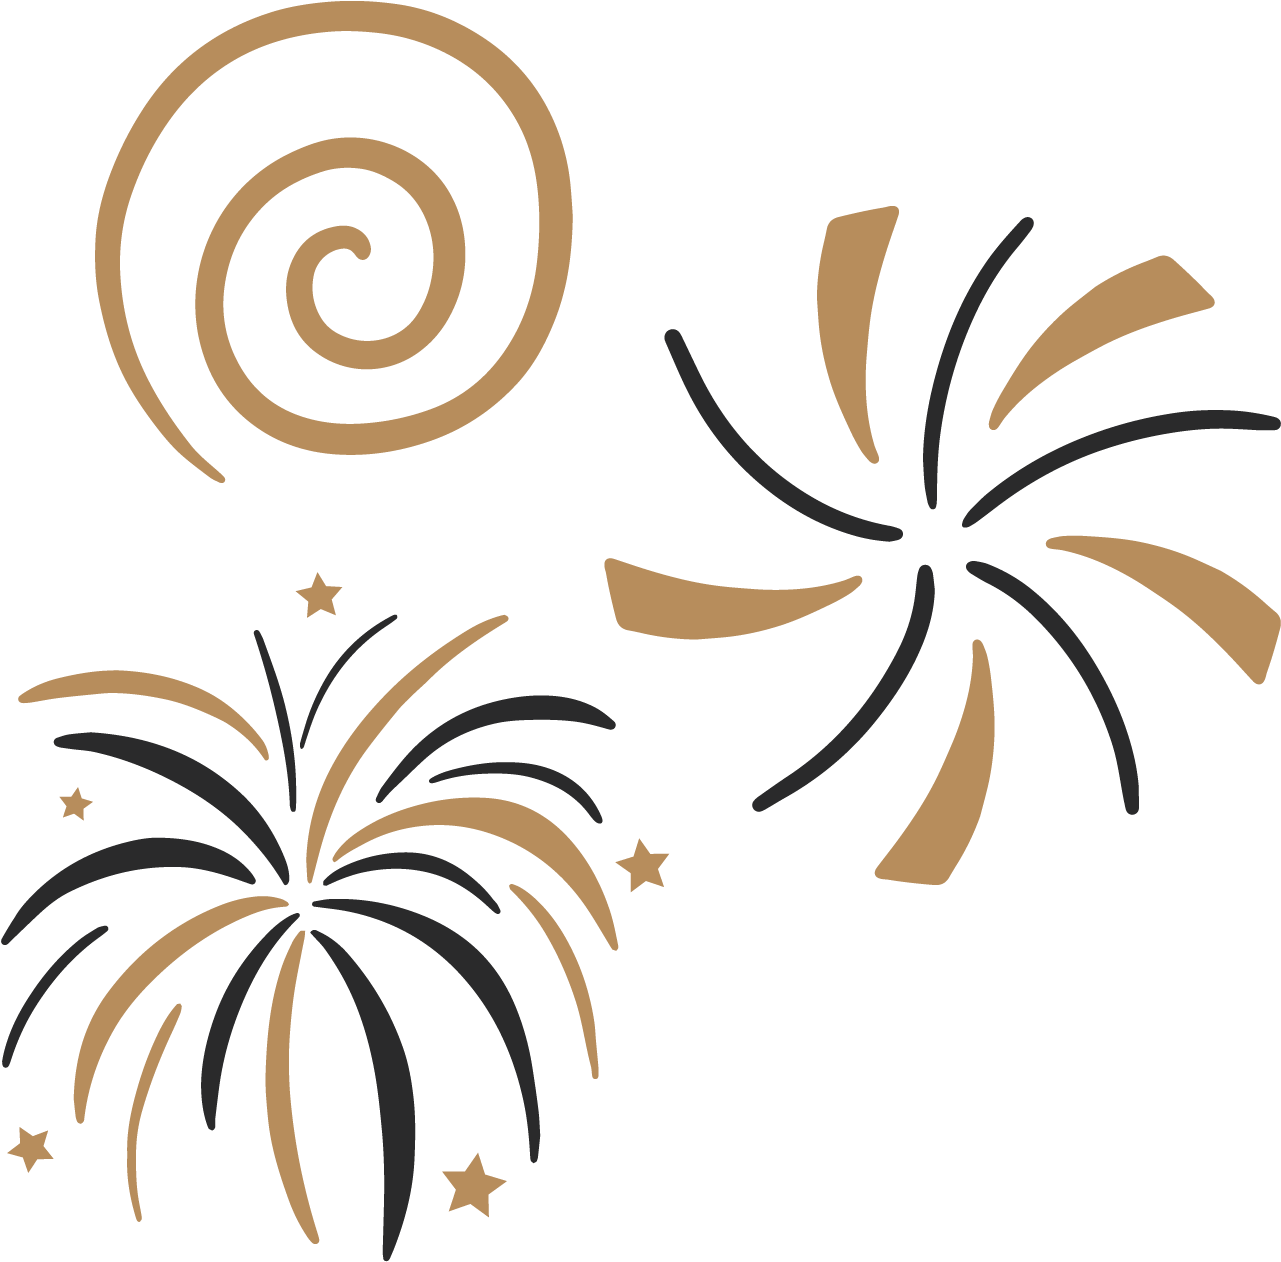 Fireworks And Spirals On A Black Background